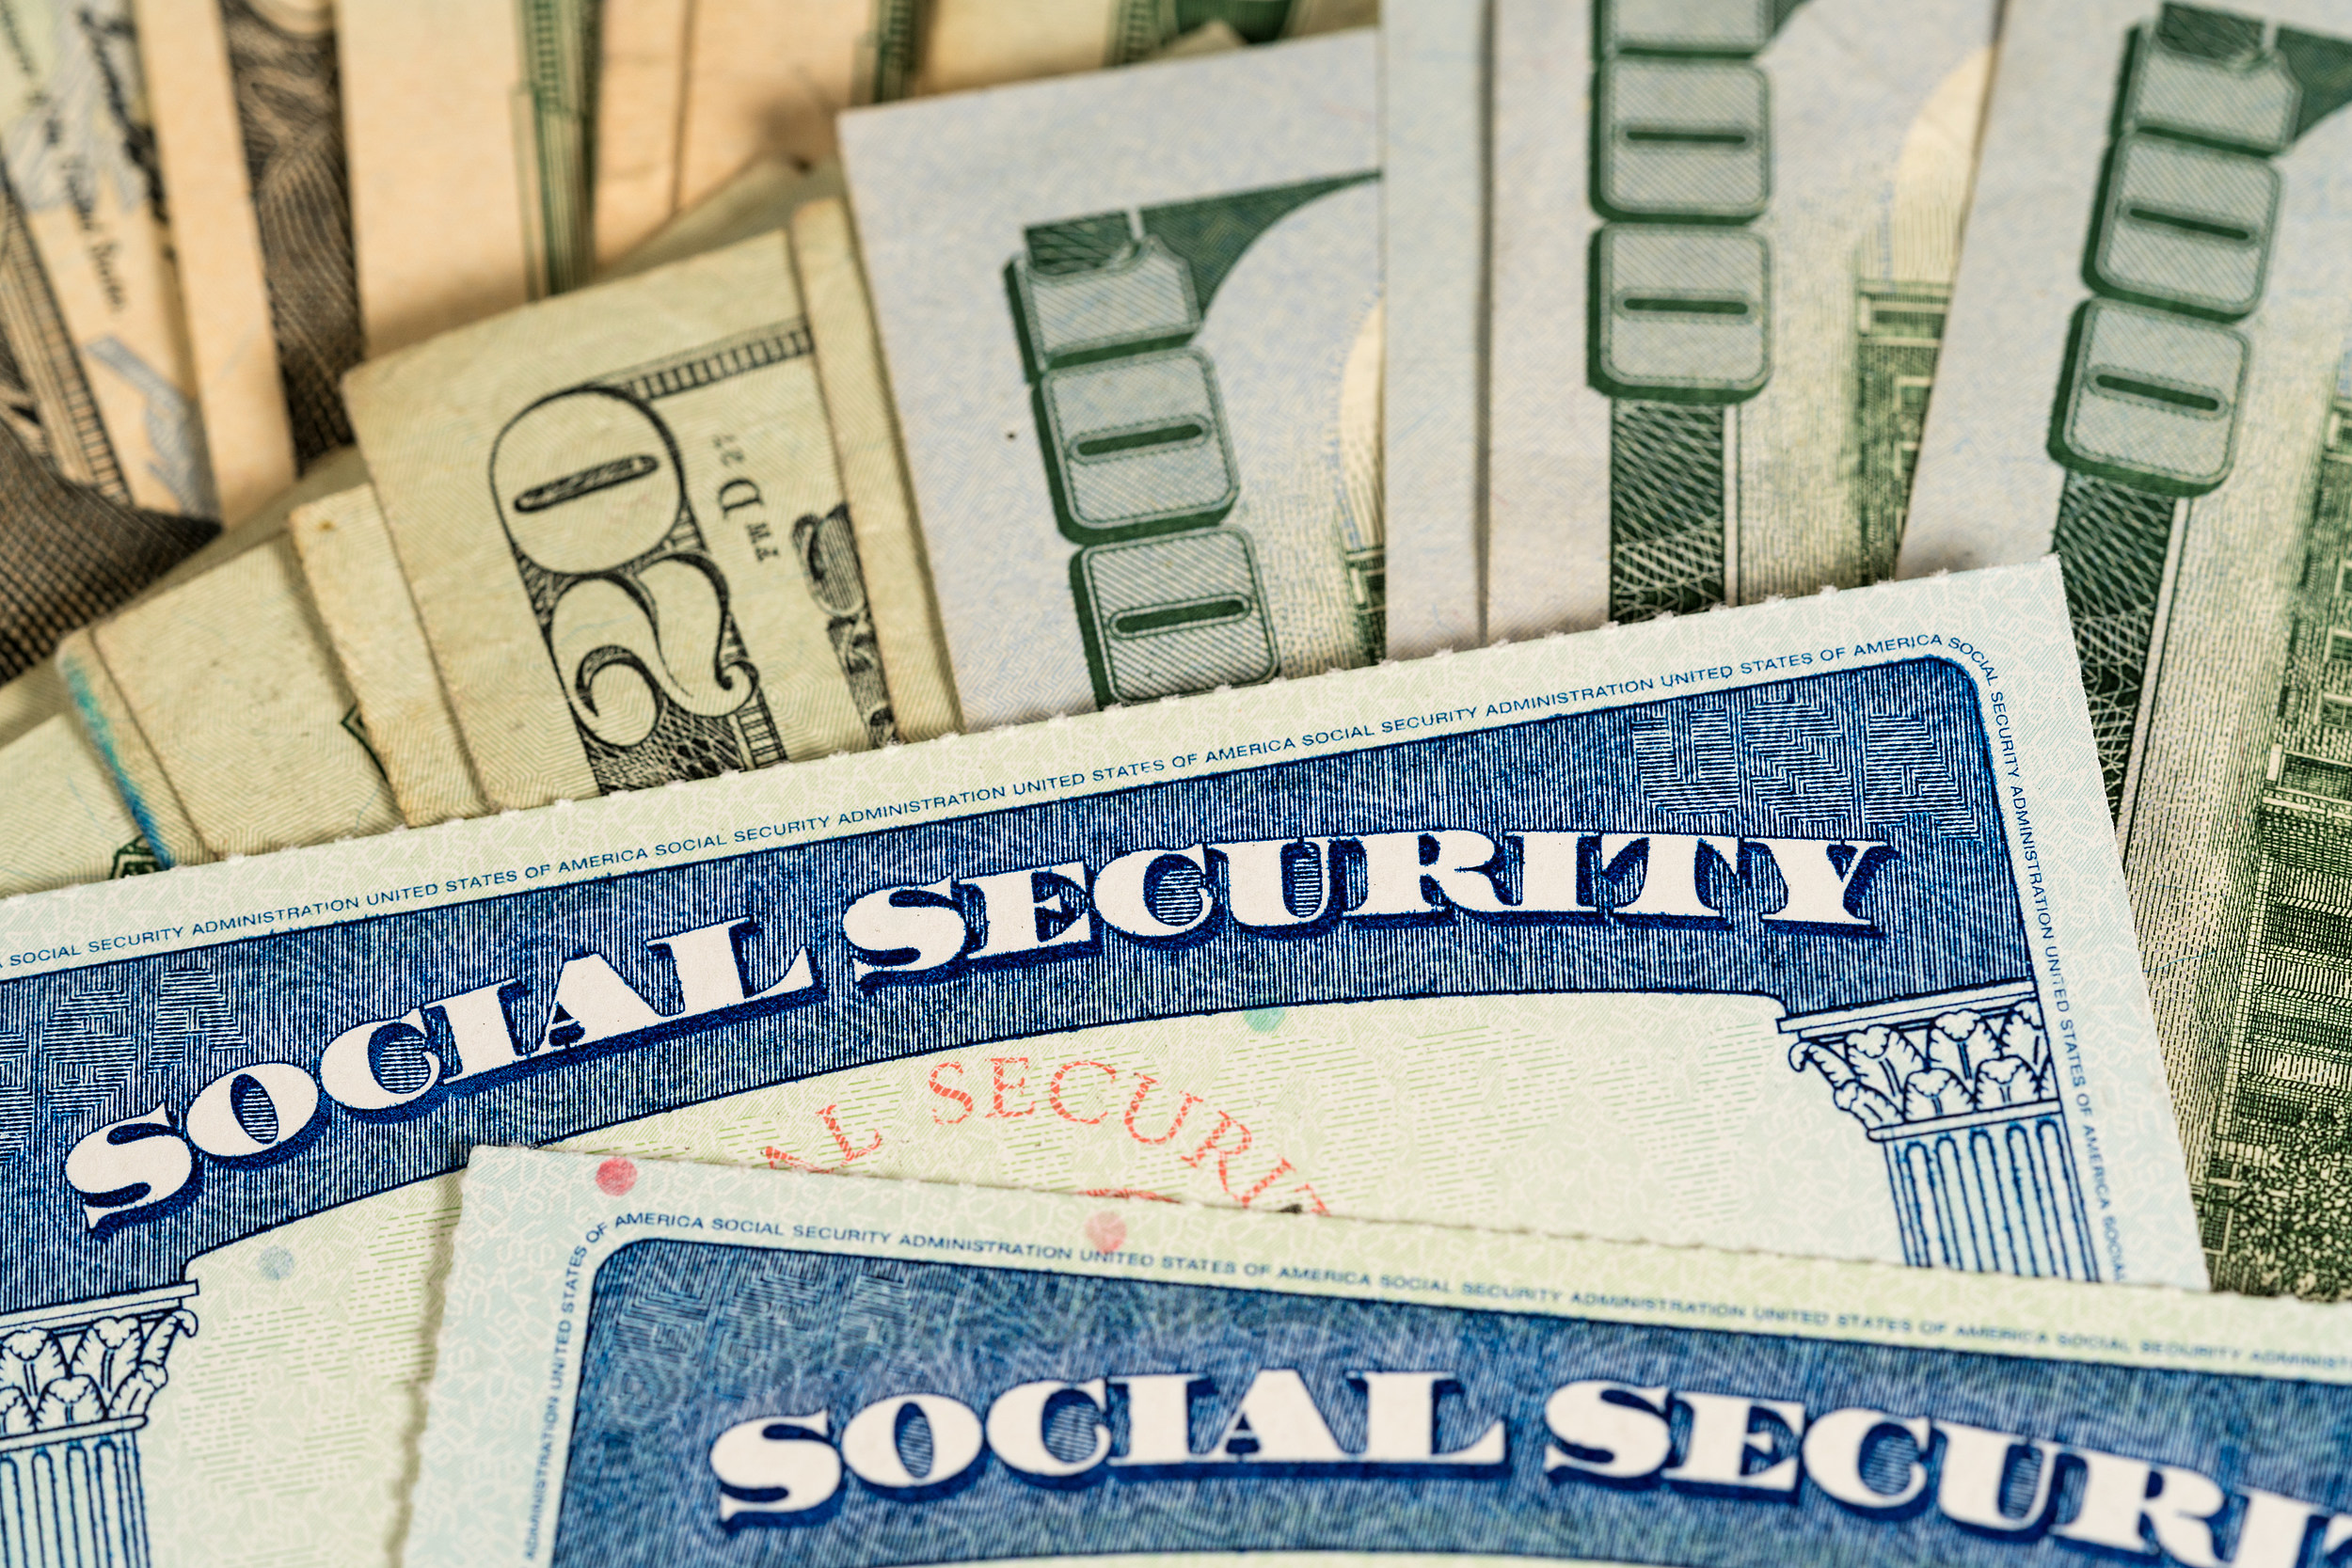 When will the 5.9% rise in Social Security payments begin in 2022?al Security